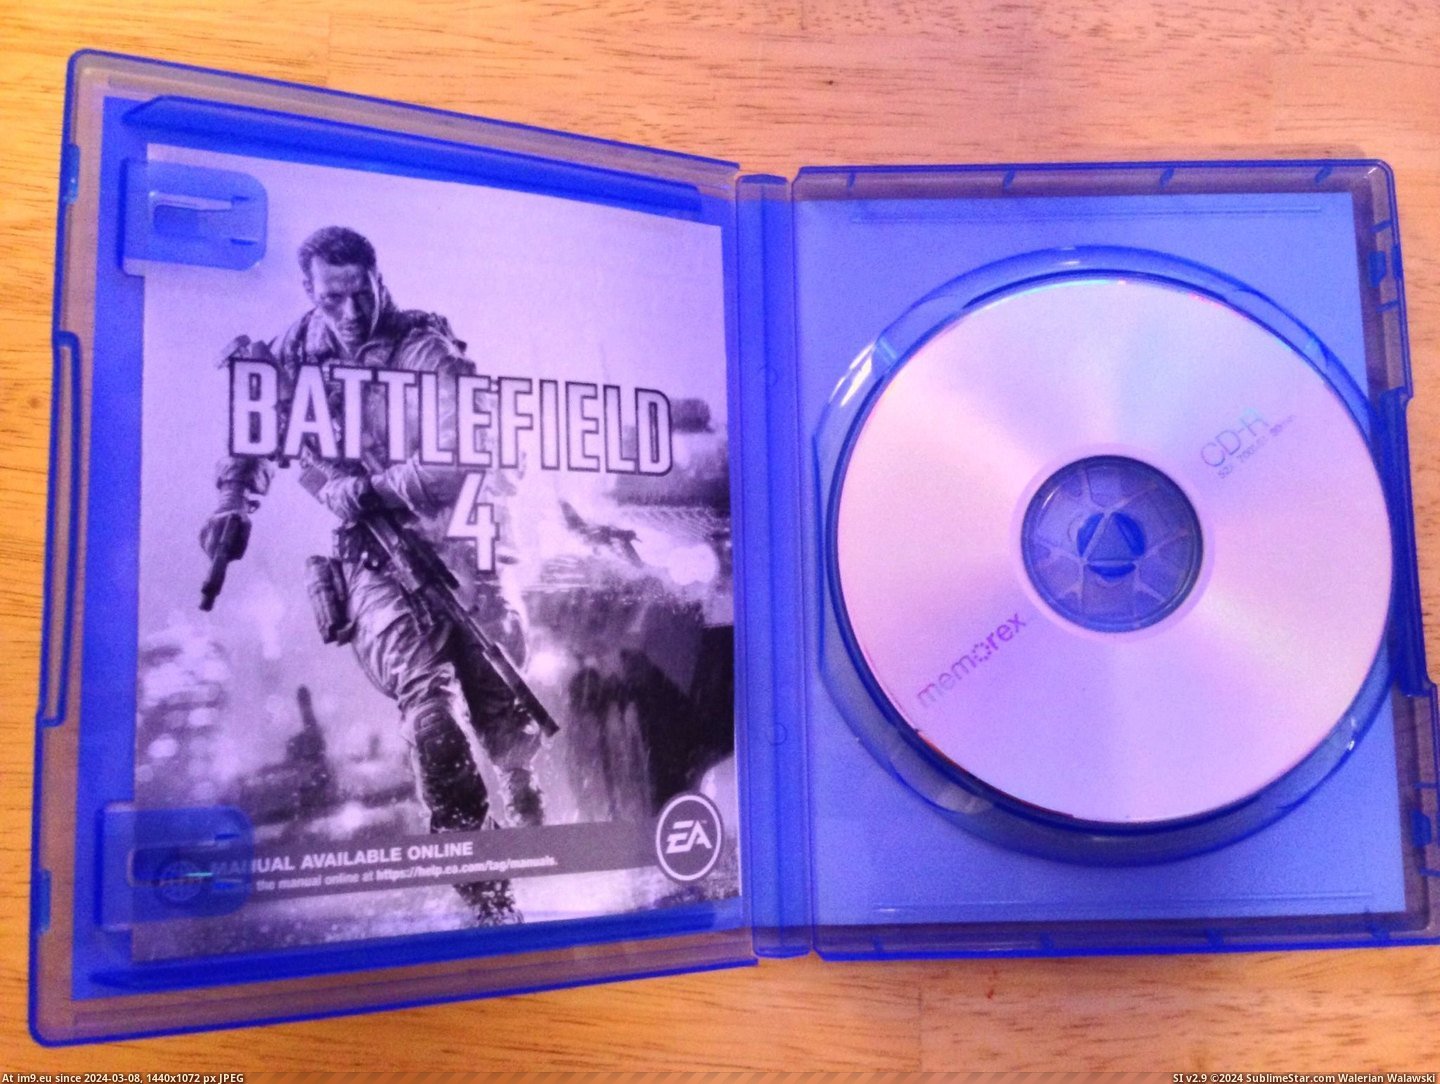 #Gaming #For #Was #Walmart #Ps4 #Battlefield #Fuck #How #Bought [Gaming] Bought Battlefield 4 for PS4 from Walmart, this was inside. How the fuck is this possible? Pic. (Image of album My r/GAMING favs))